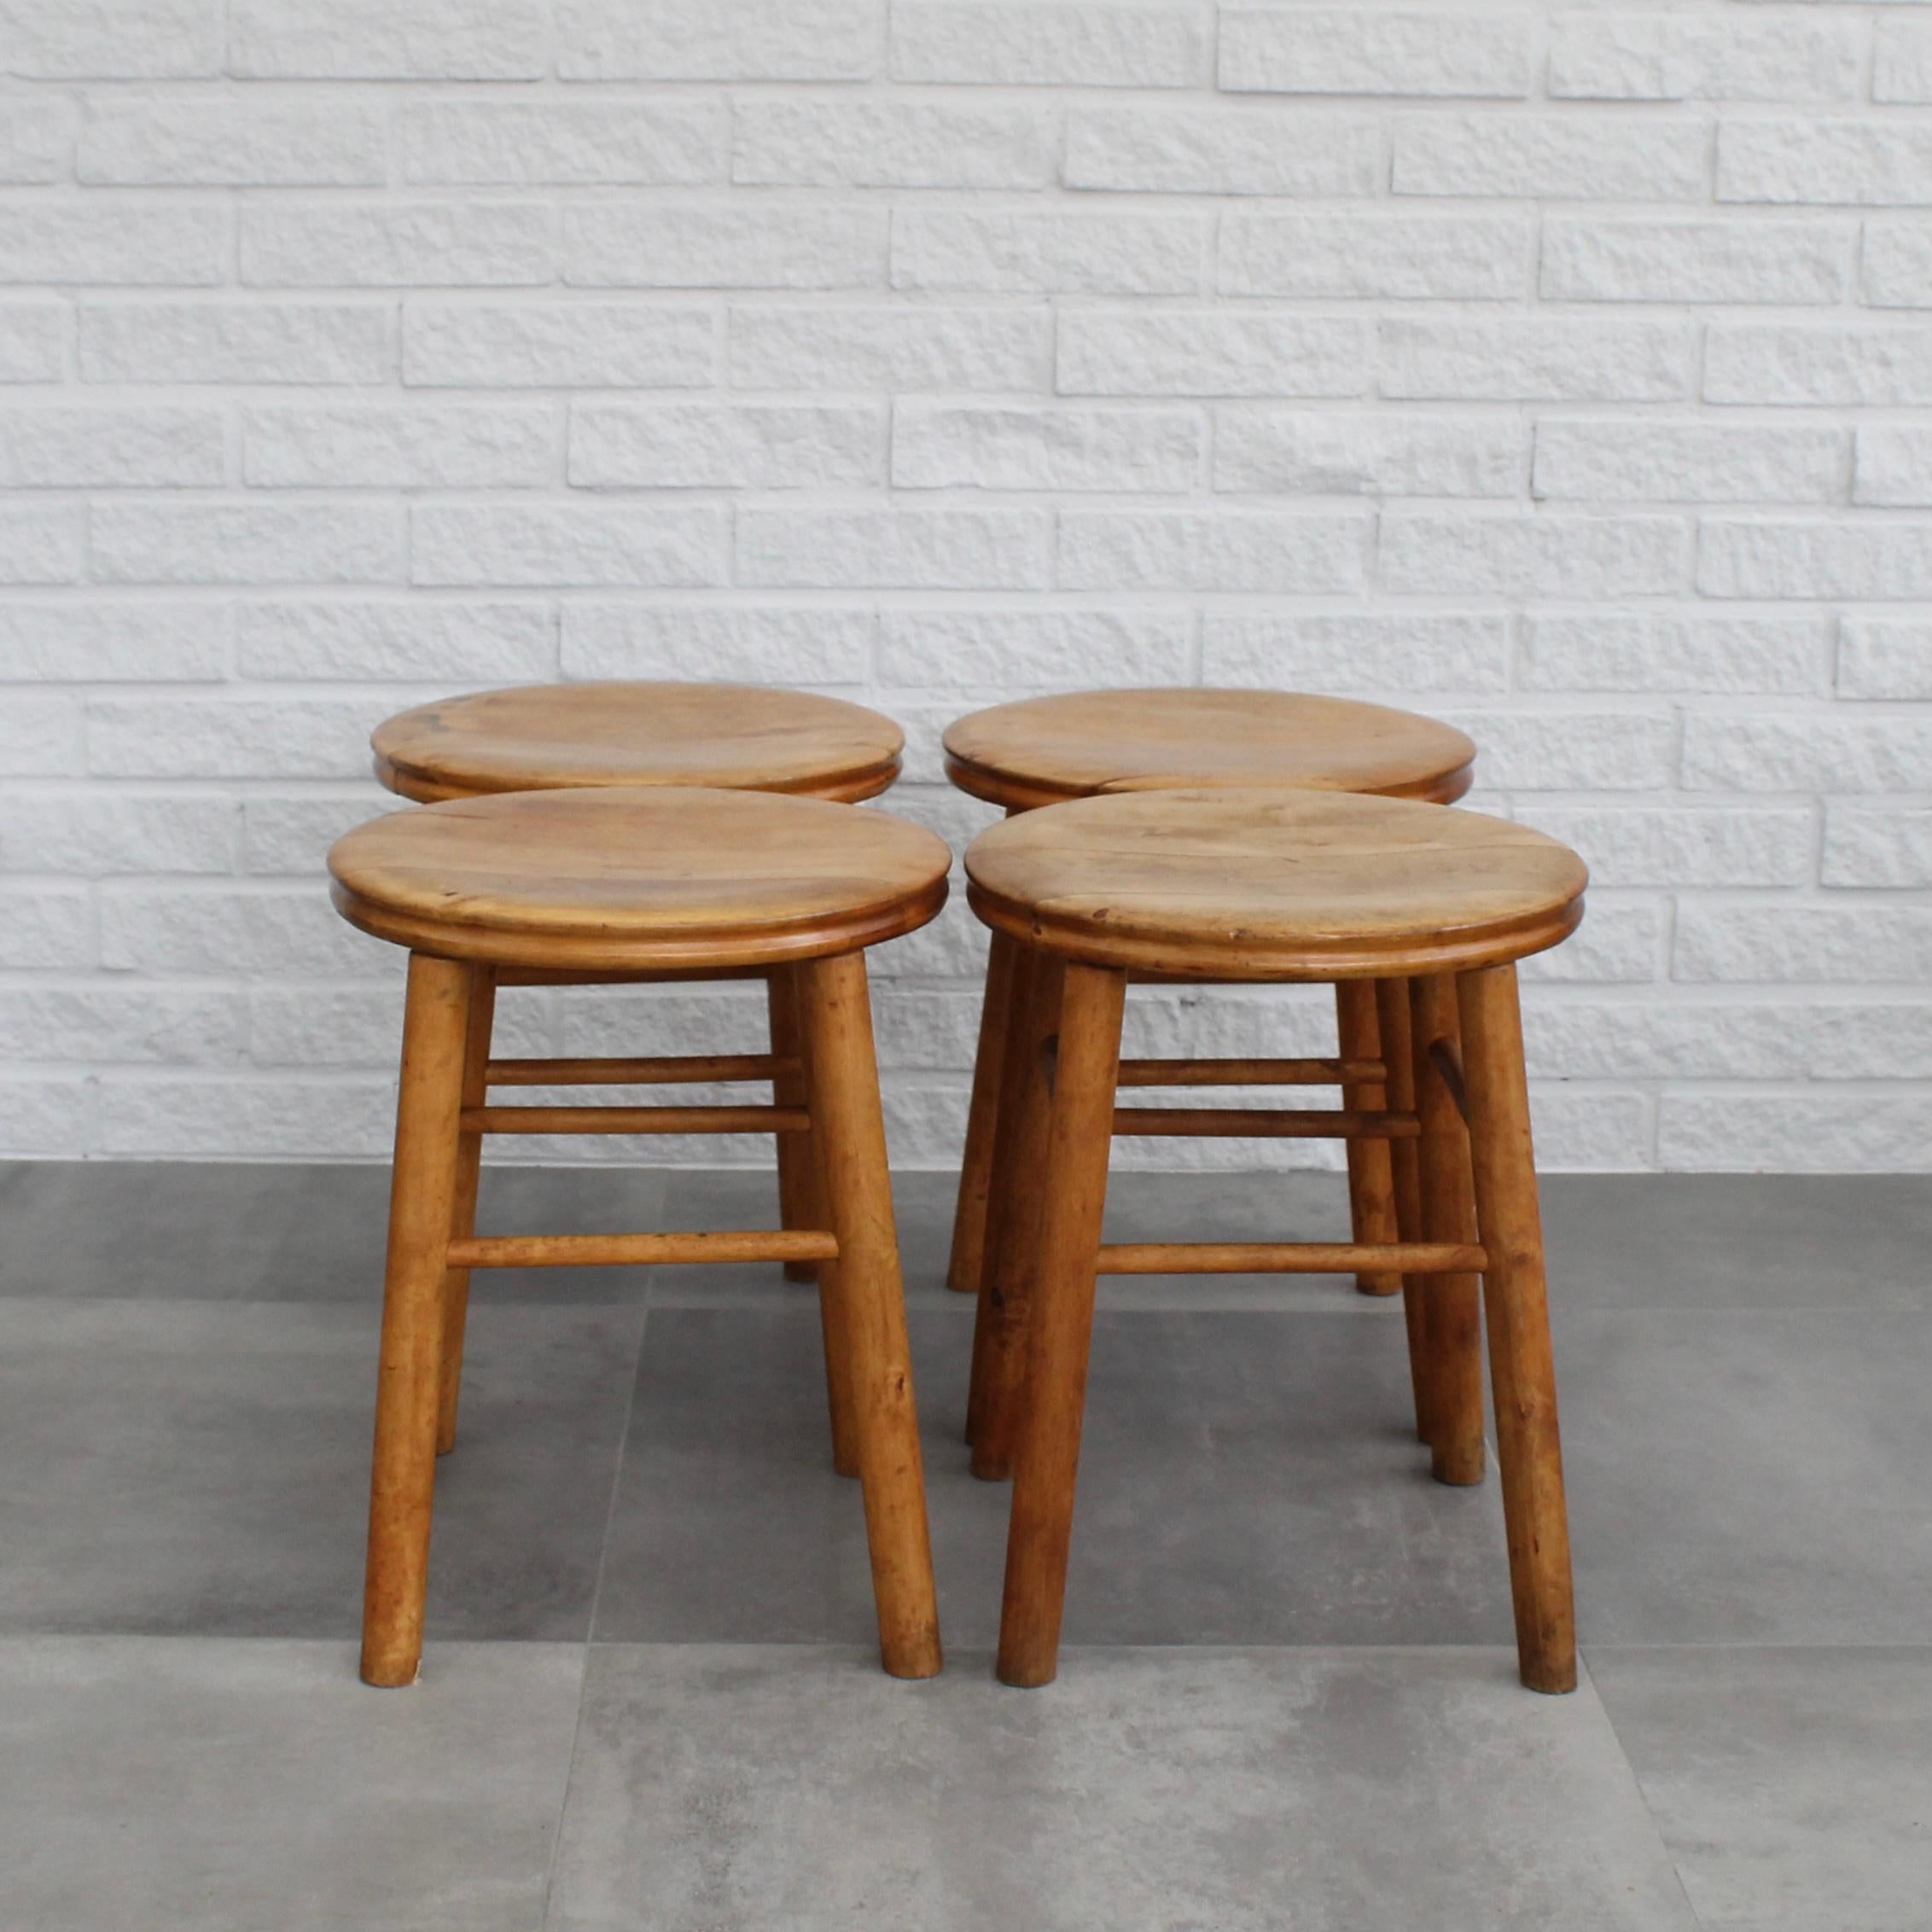 Four Swedish birchwood stools from the 1930s with inspiration from antique peasant furniture. Showcasing a minimalist design characterized by straight legs connected with stretchers and a somewhat bowl-shaped round seat. 